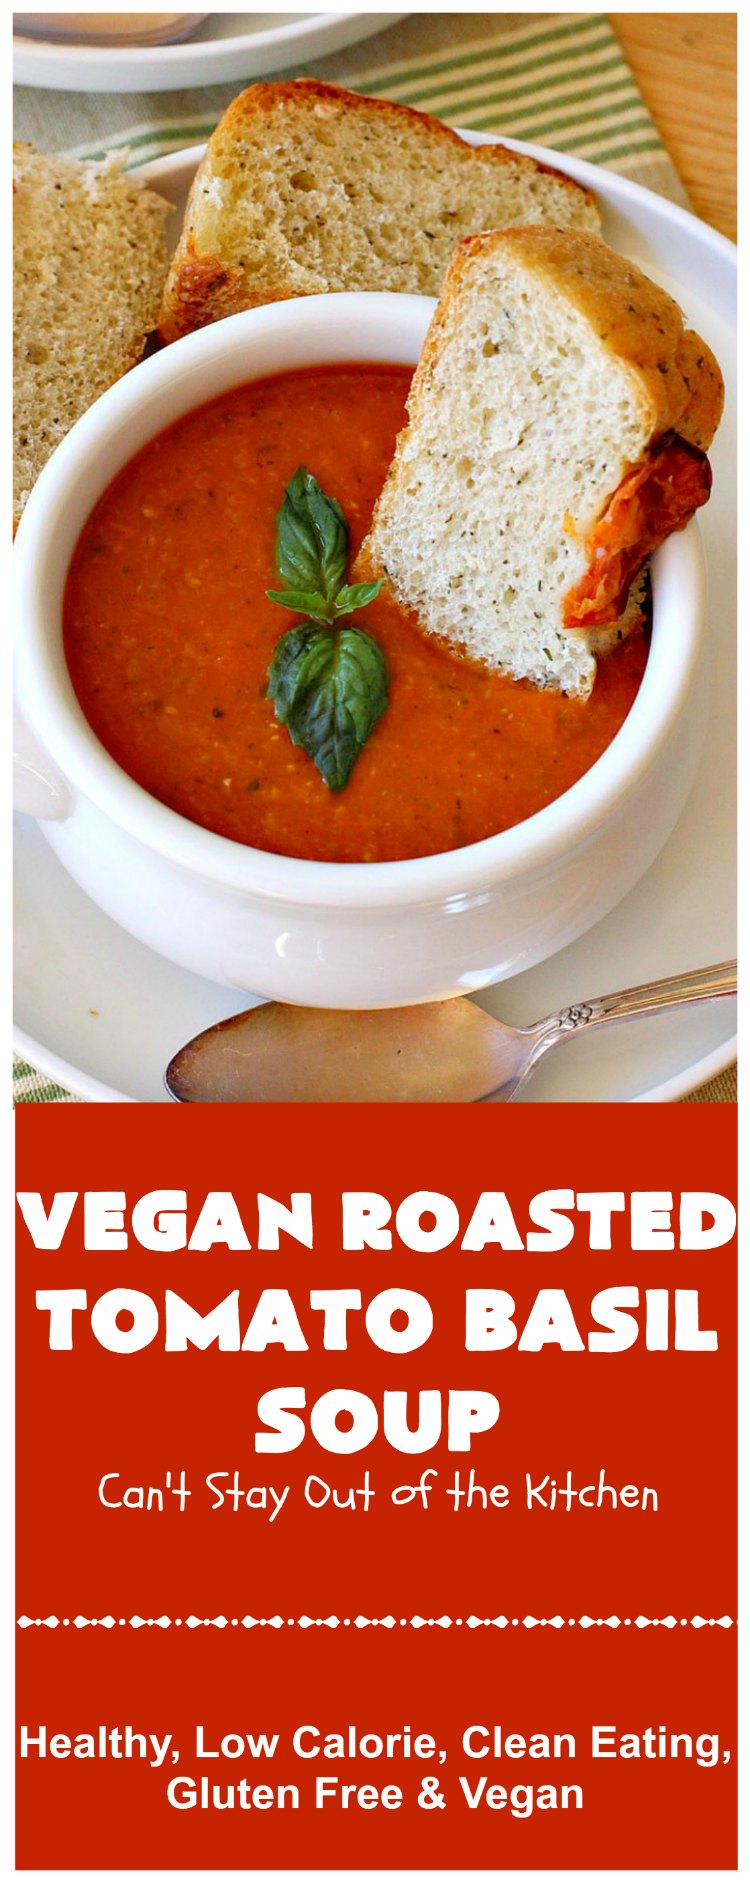 Vegan Roasted Tomato Basil Soup | Can't Stay Out of the Kitchen | this delicious #soup starts with roasting all the veggies for amped up flavors. It's terrific served with #GrilledCheeseSandwiches or #cornbread. This comfort food #recipe is  #healthy, #LowCalorie #Vegan & #GlutenFree. #tomatoes #TomatoBasilSoup #VeganRoastedTomatoBasilSoup